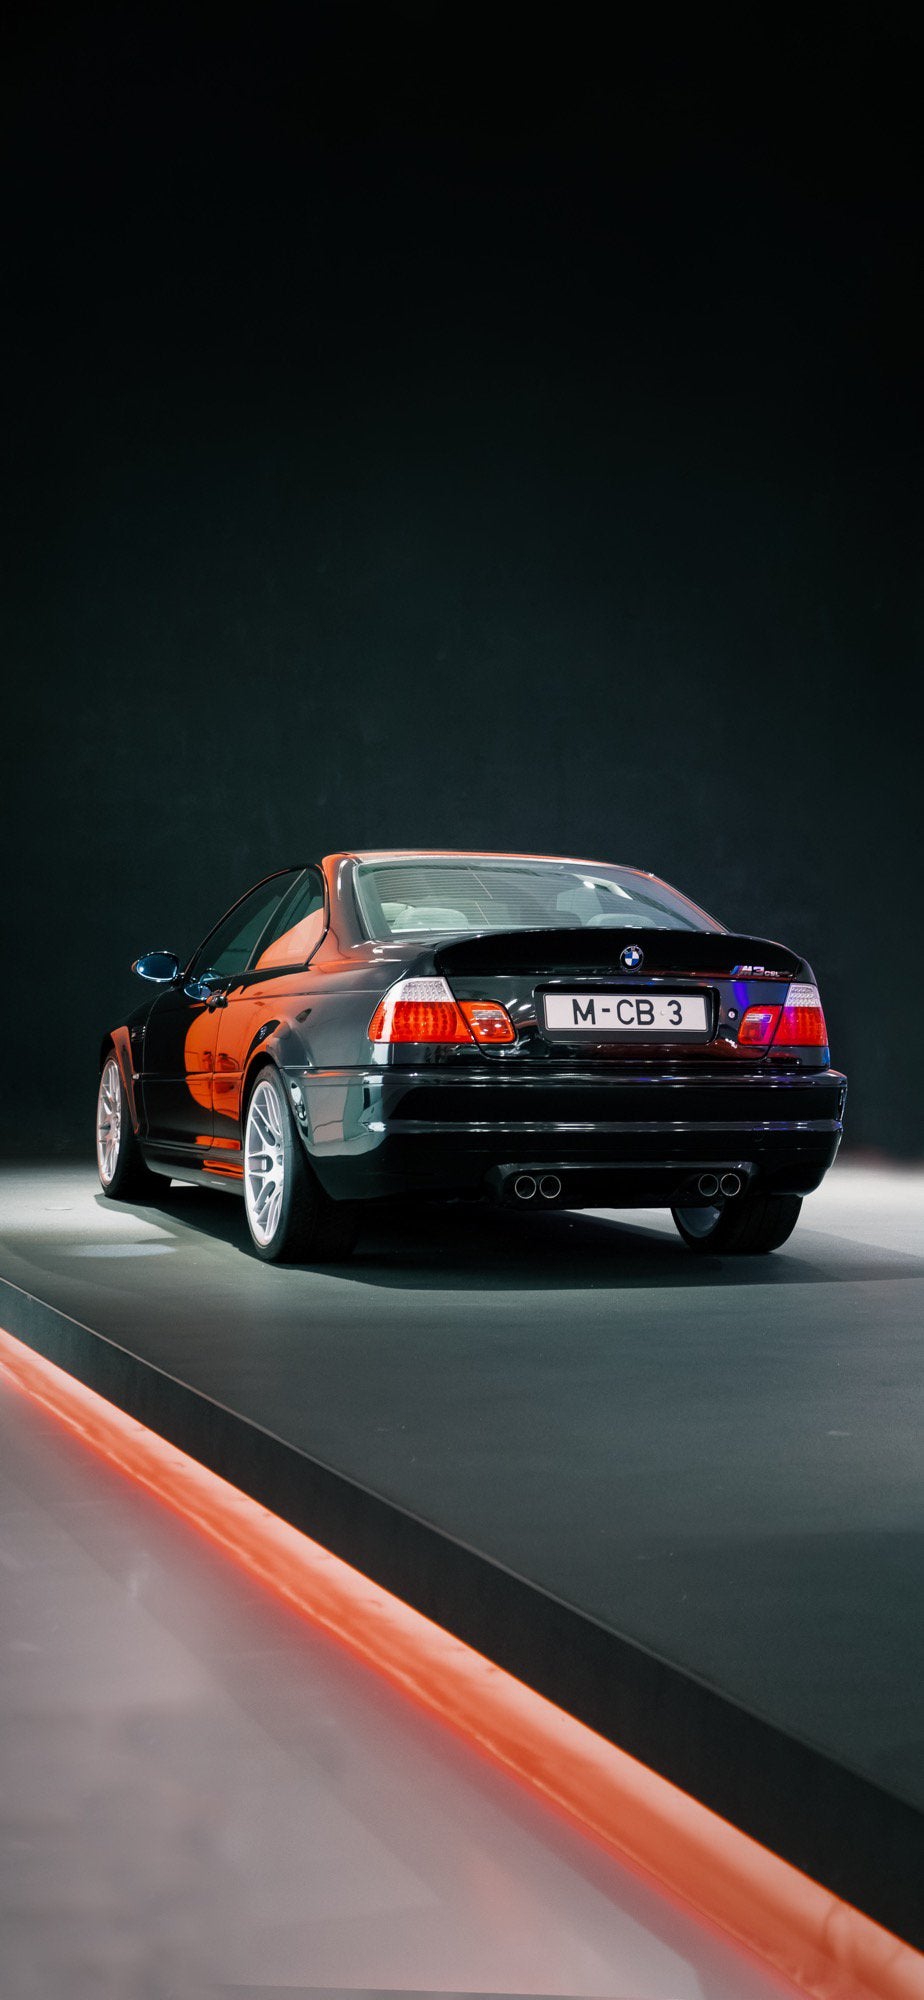 iPhone wallpaper I made from the BMW museum (E46 M3 CSL)